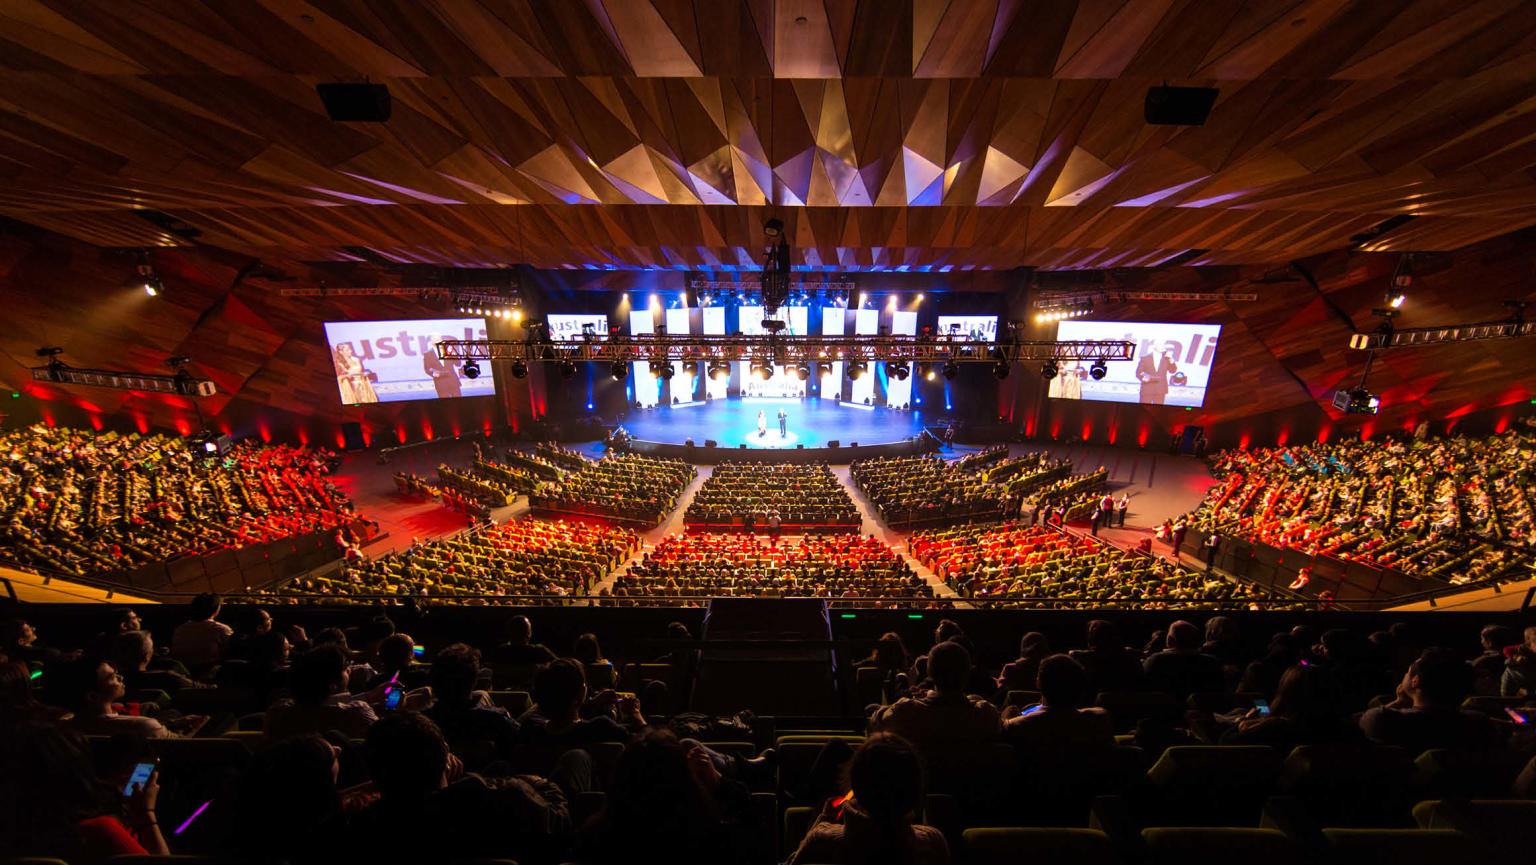 Image of a large multipurpose space within the Melbourne Convention and Exhibition Centre (MCEC). The space has ample multi-levelled green seating that faces a stage with two large digital screens, one on each side of the stage. The space is well-lit and an event is in progress.